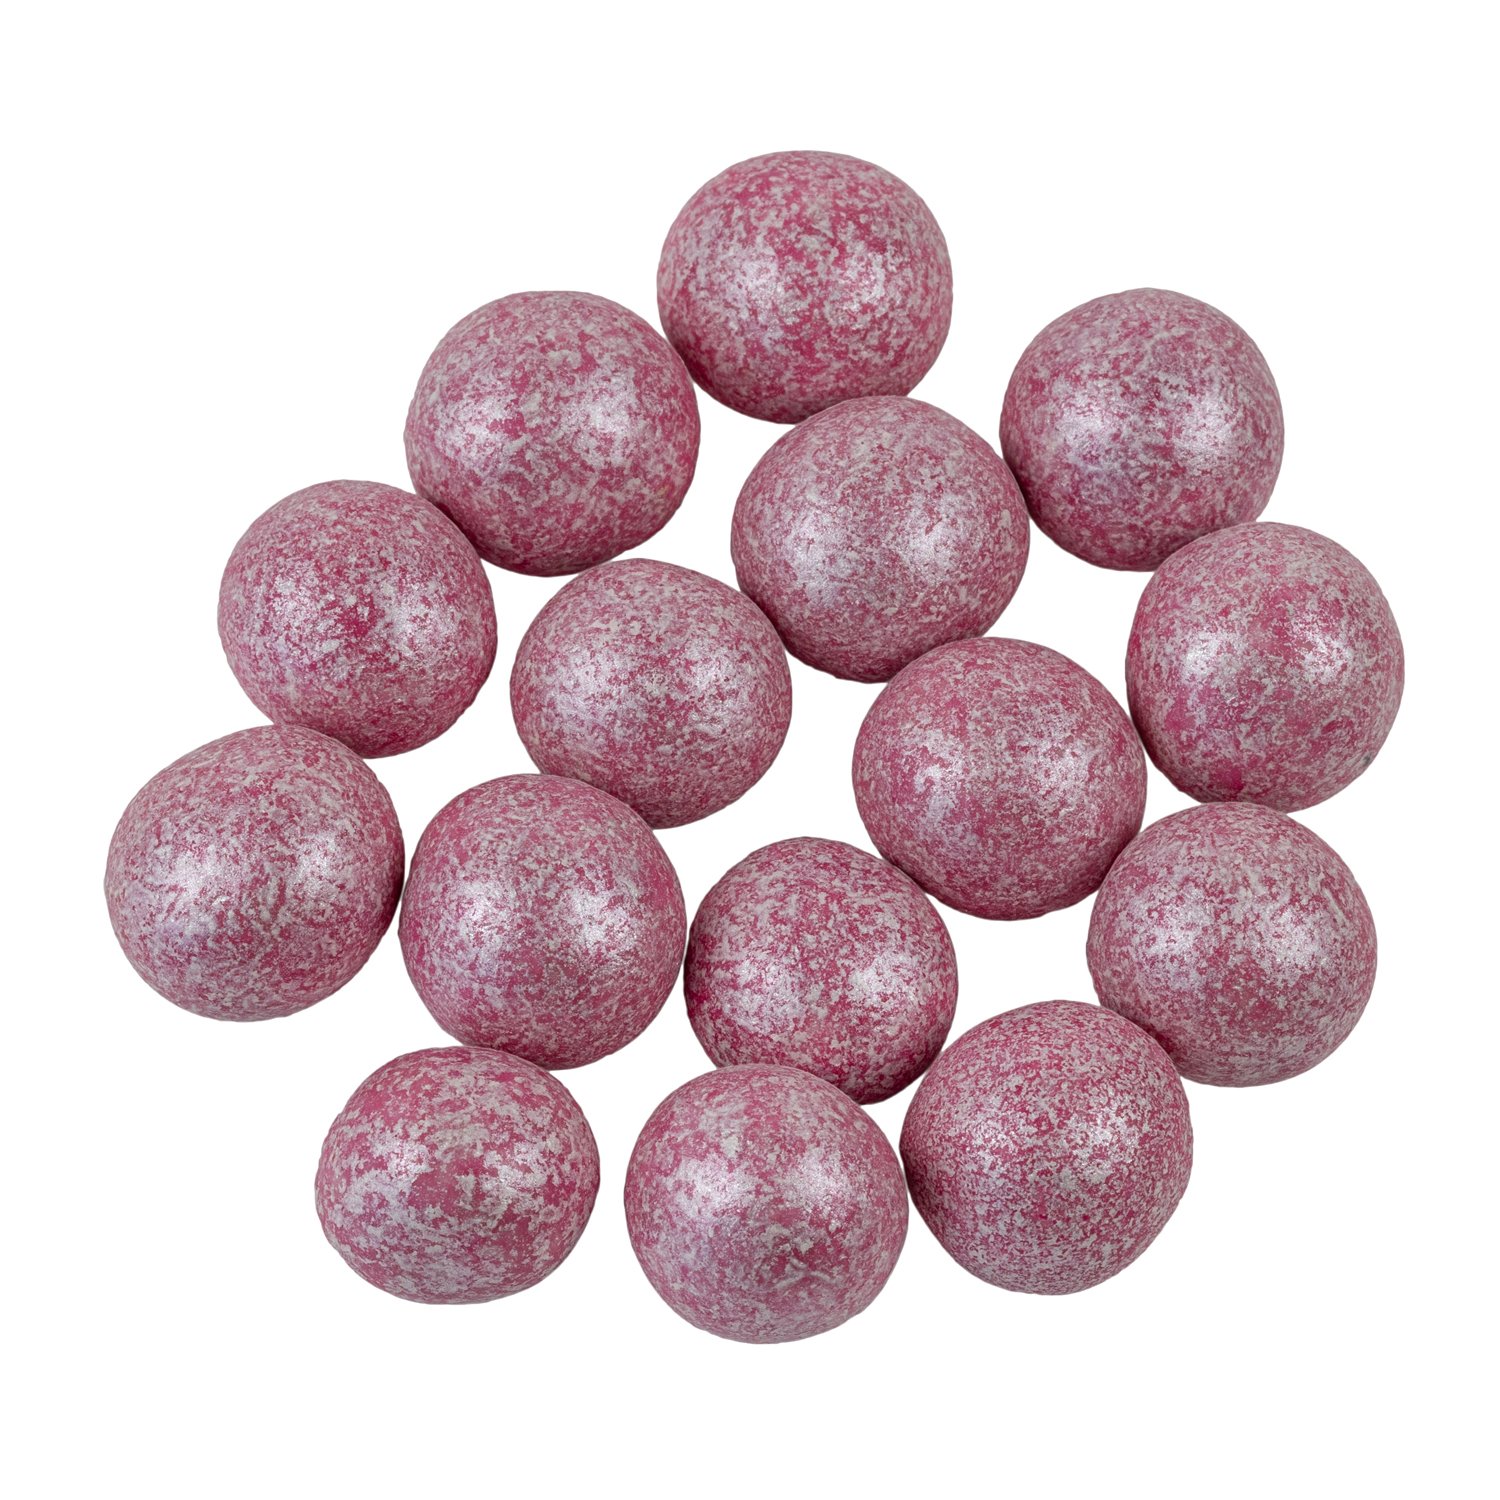 Les Perles Summer Rose - toasted hazelnut in chocolate pink - 1kg